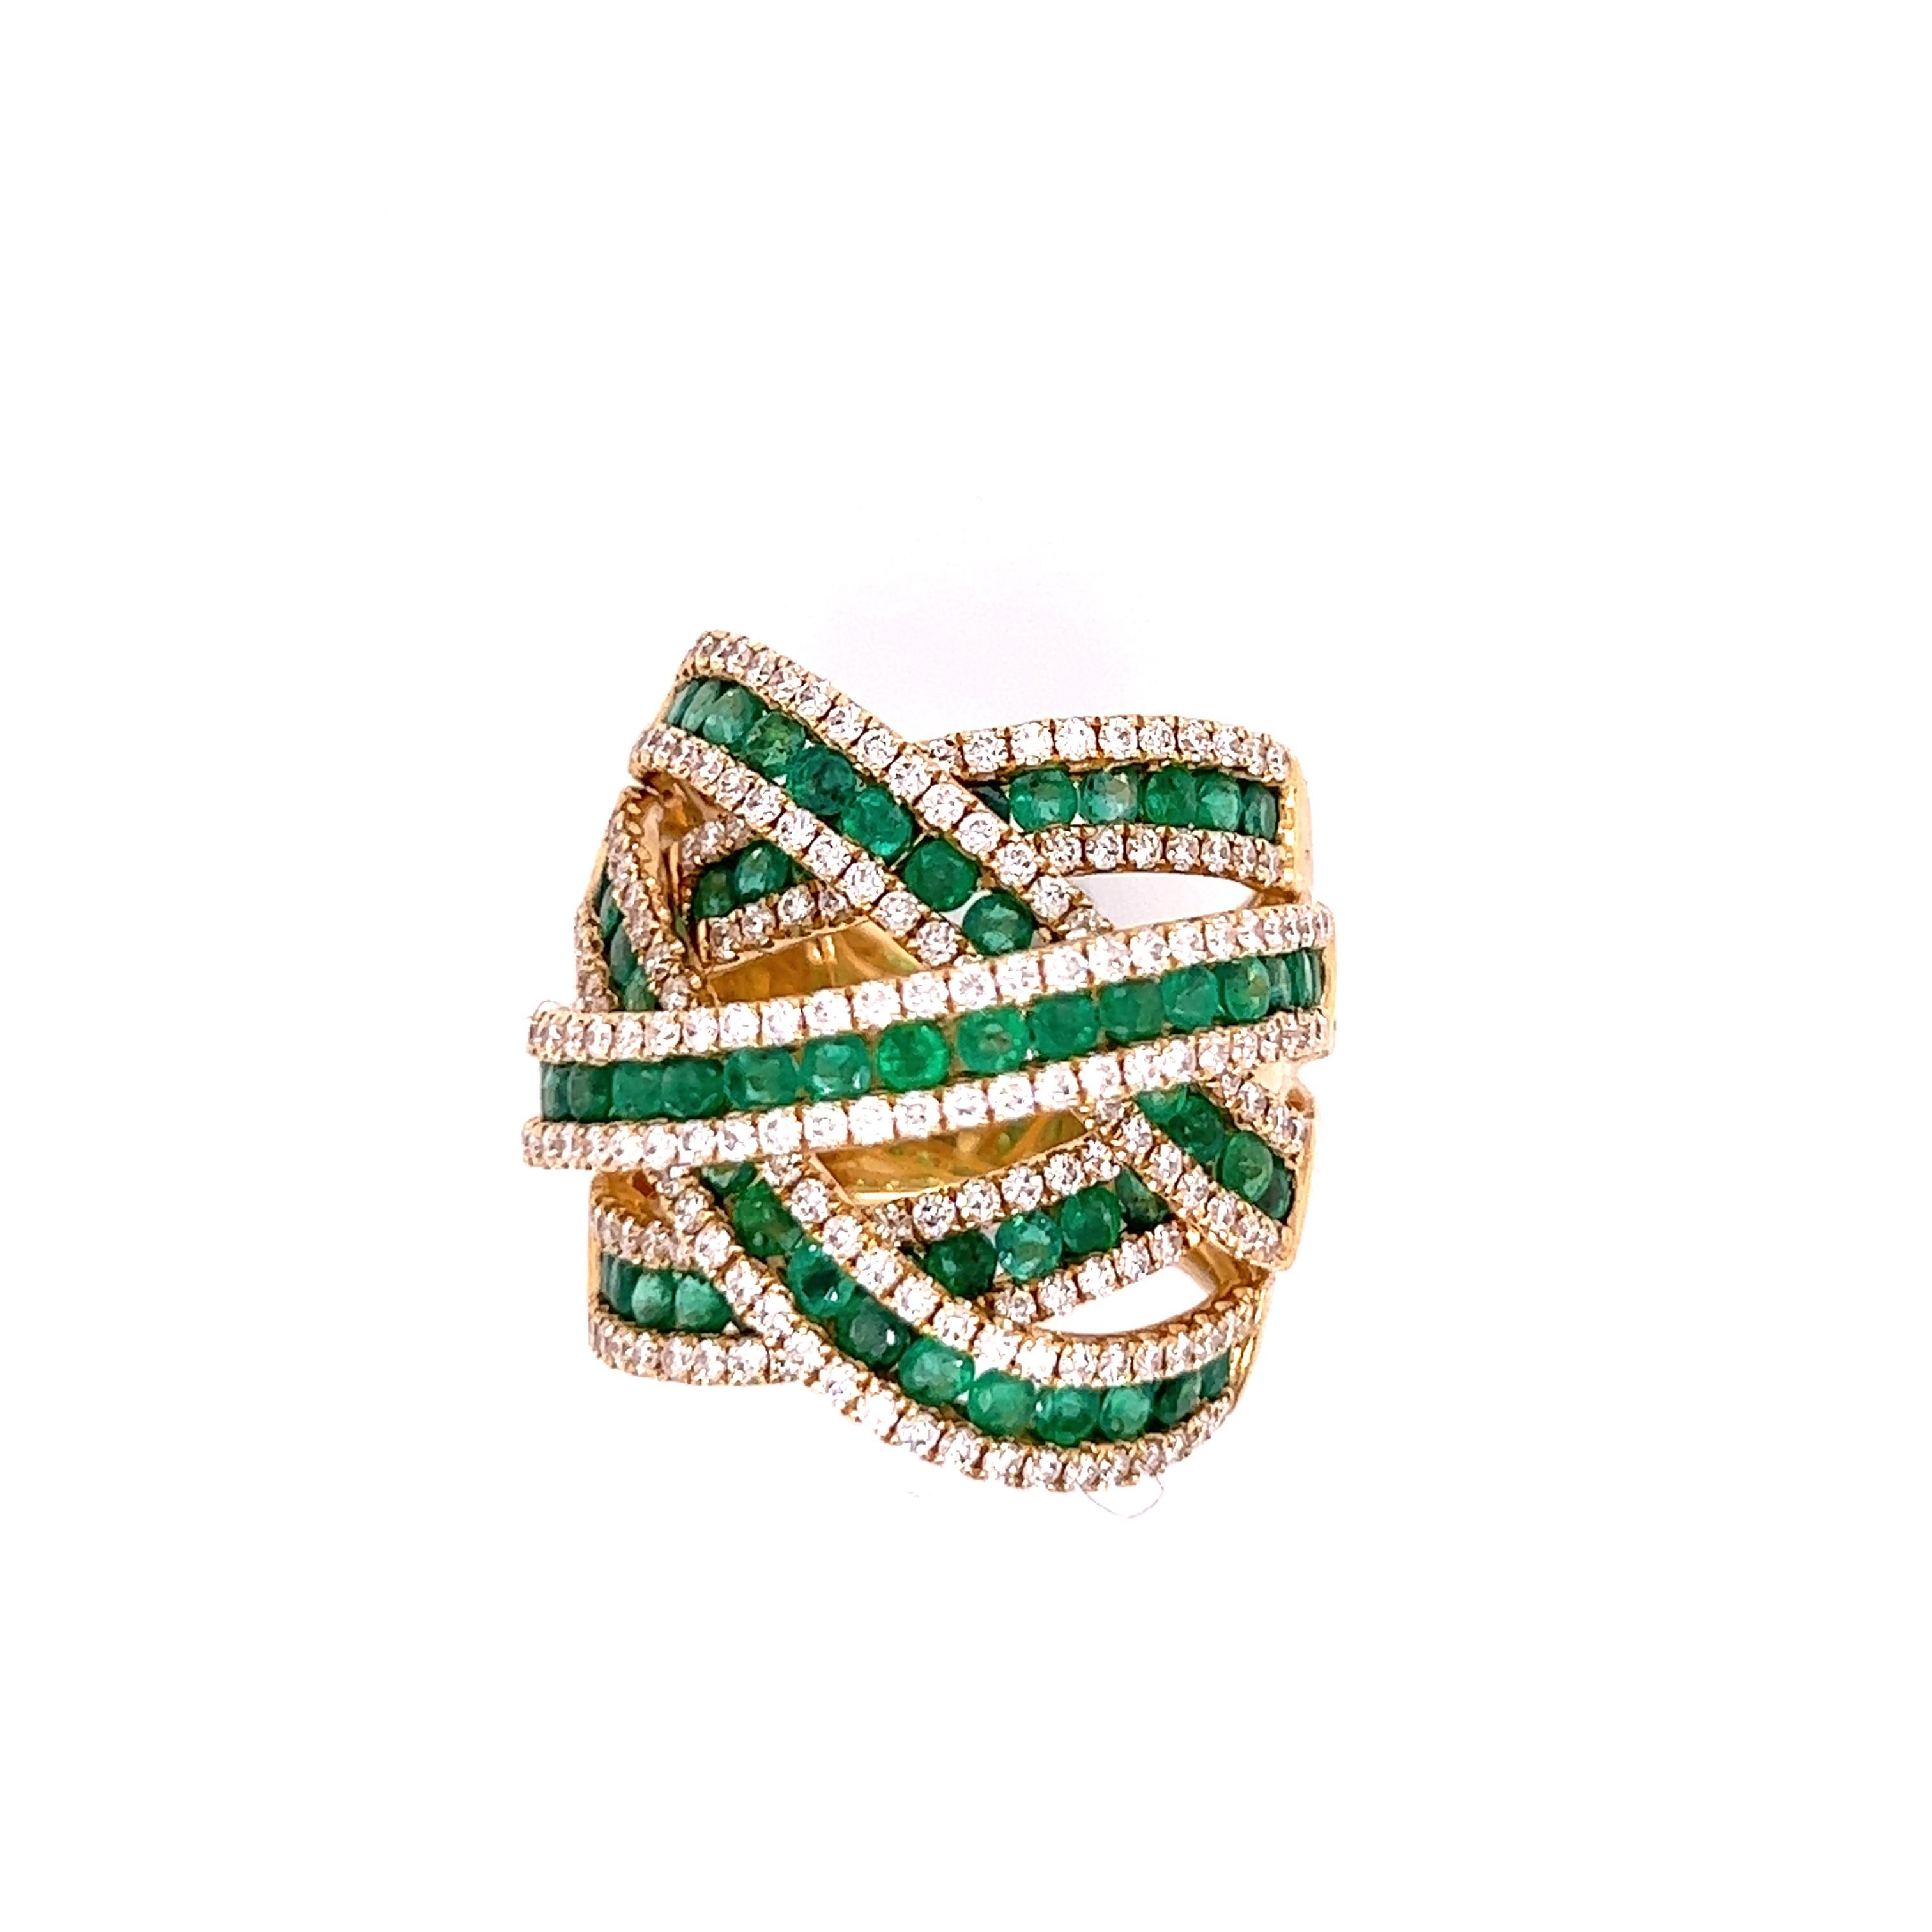 18K YELLOW Gold with DIAMONDS AND EMERALDS Cluster Cocktails Ring

18KY - 17.24 gm 
79 Emeralds - 2.82 cts
225 Round Diamonds - 1.89 cts 
Size US 7

This glamorous ring inspired by the famous De Grisogono Allegra collection. Its made in 18k yellow